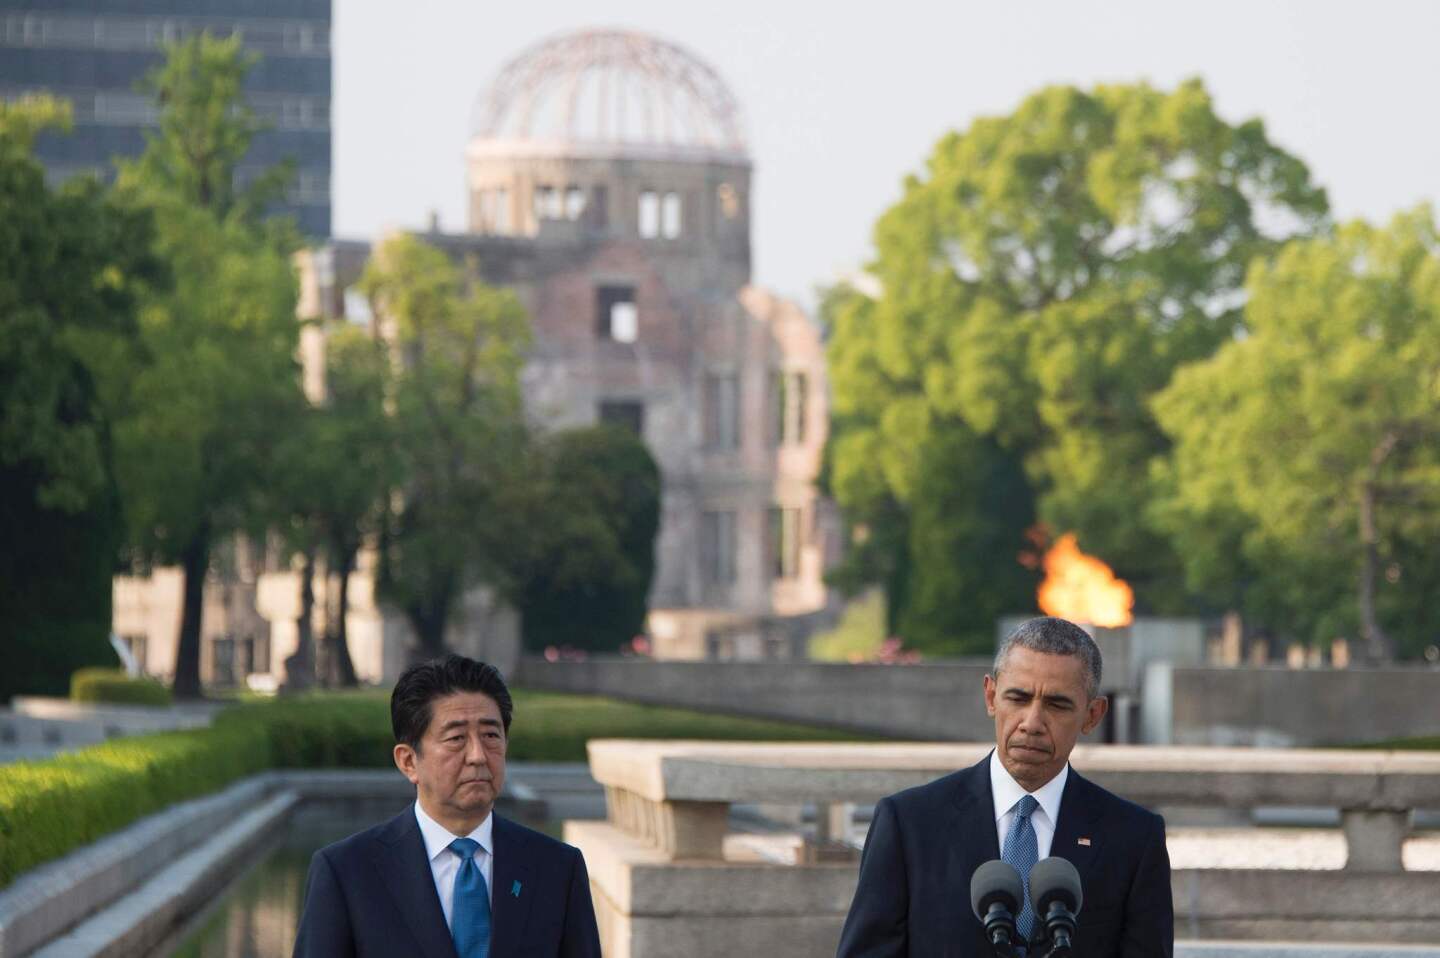 President Obama and Japanese Prime Minister Shinzo Abe deliver remarks after laying wreaths at Hiroshima Peace Memorial Park.